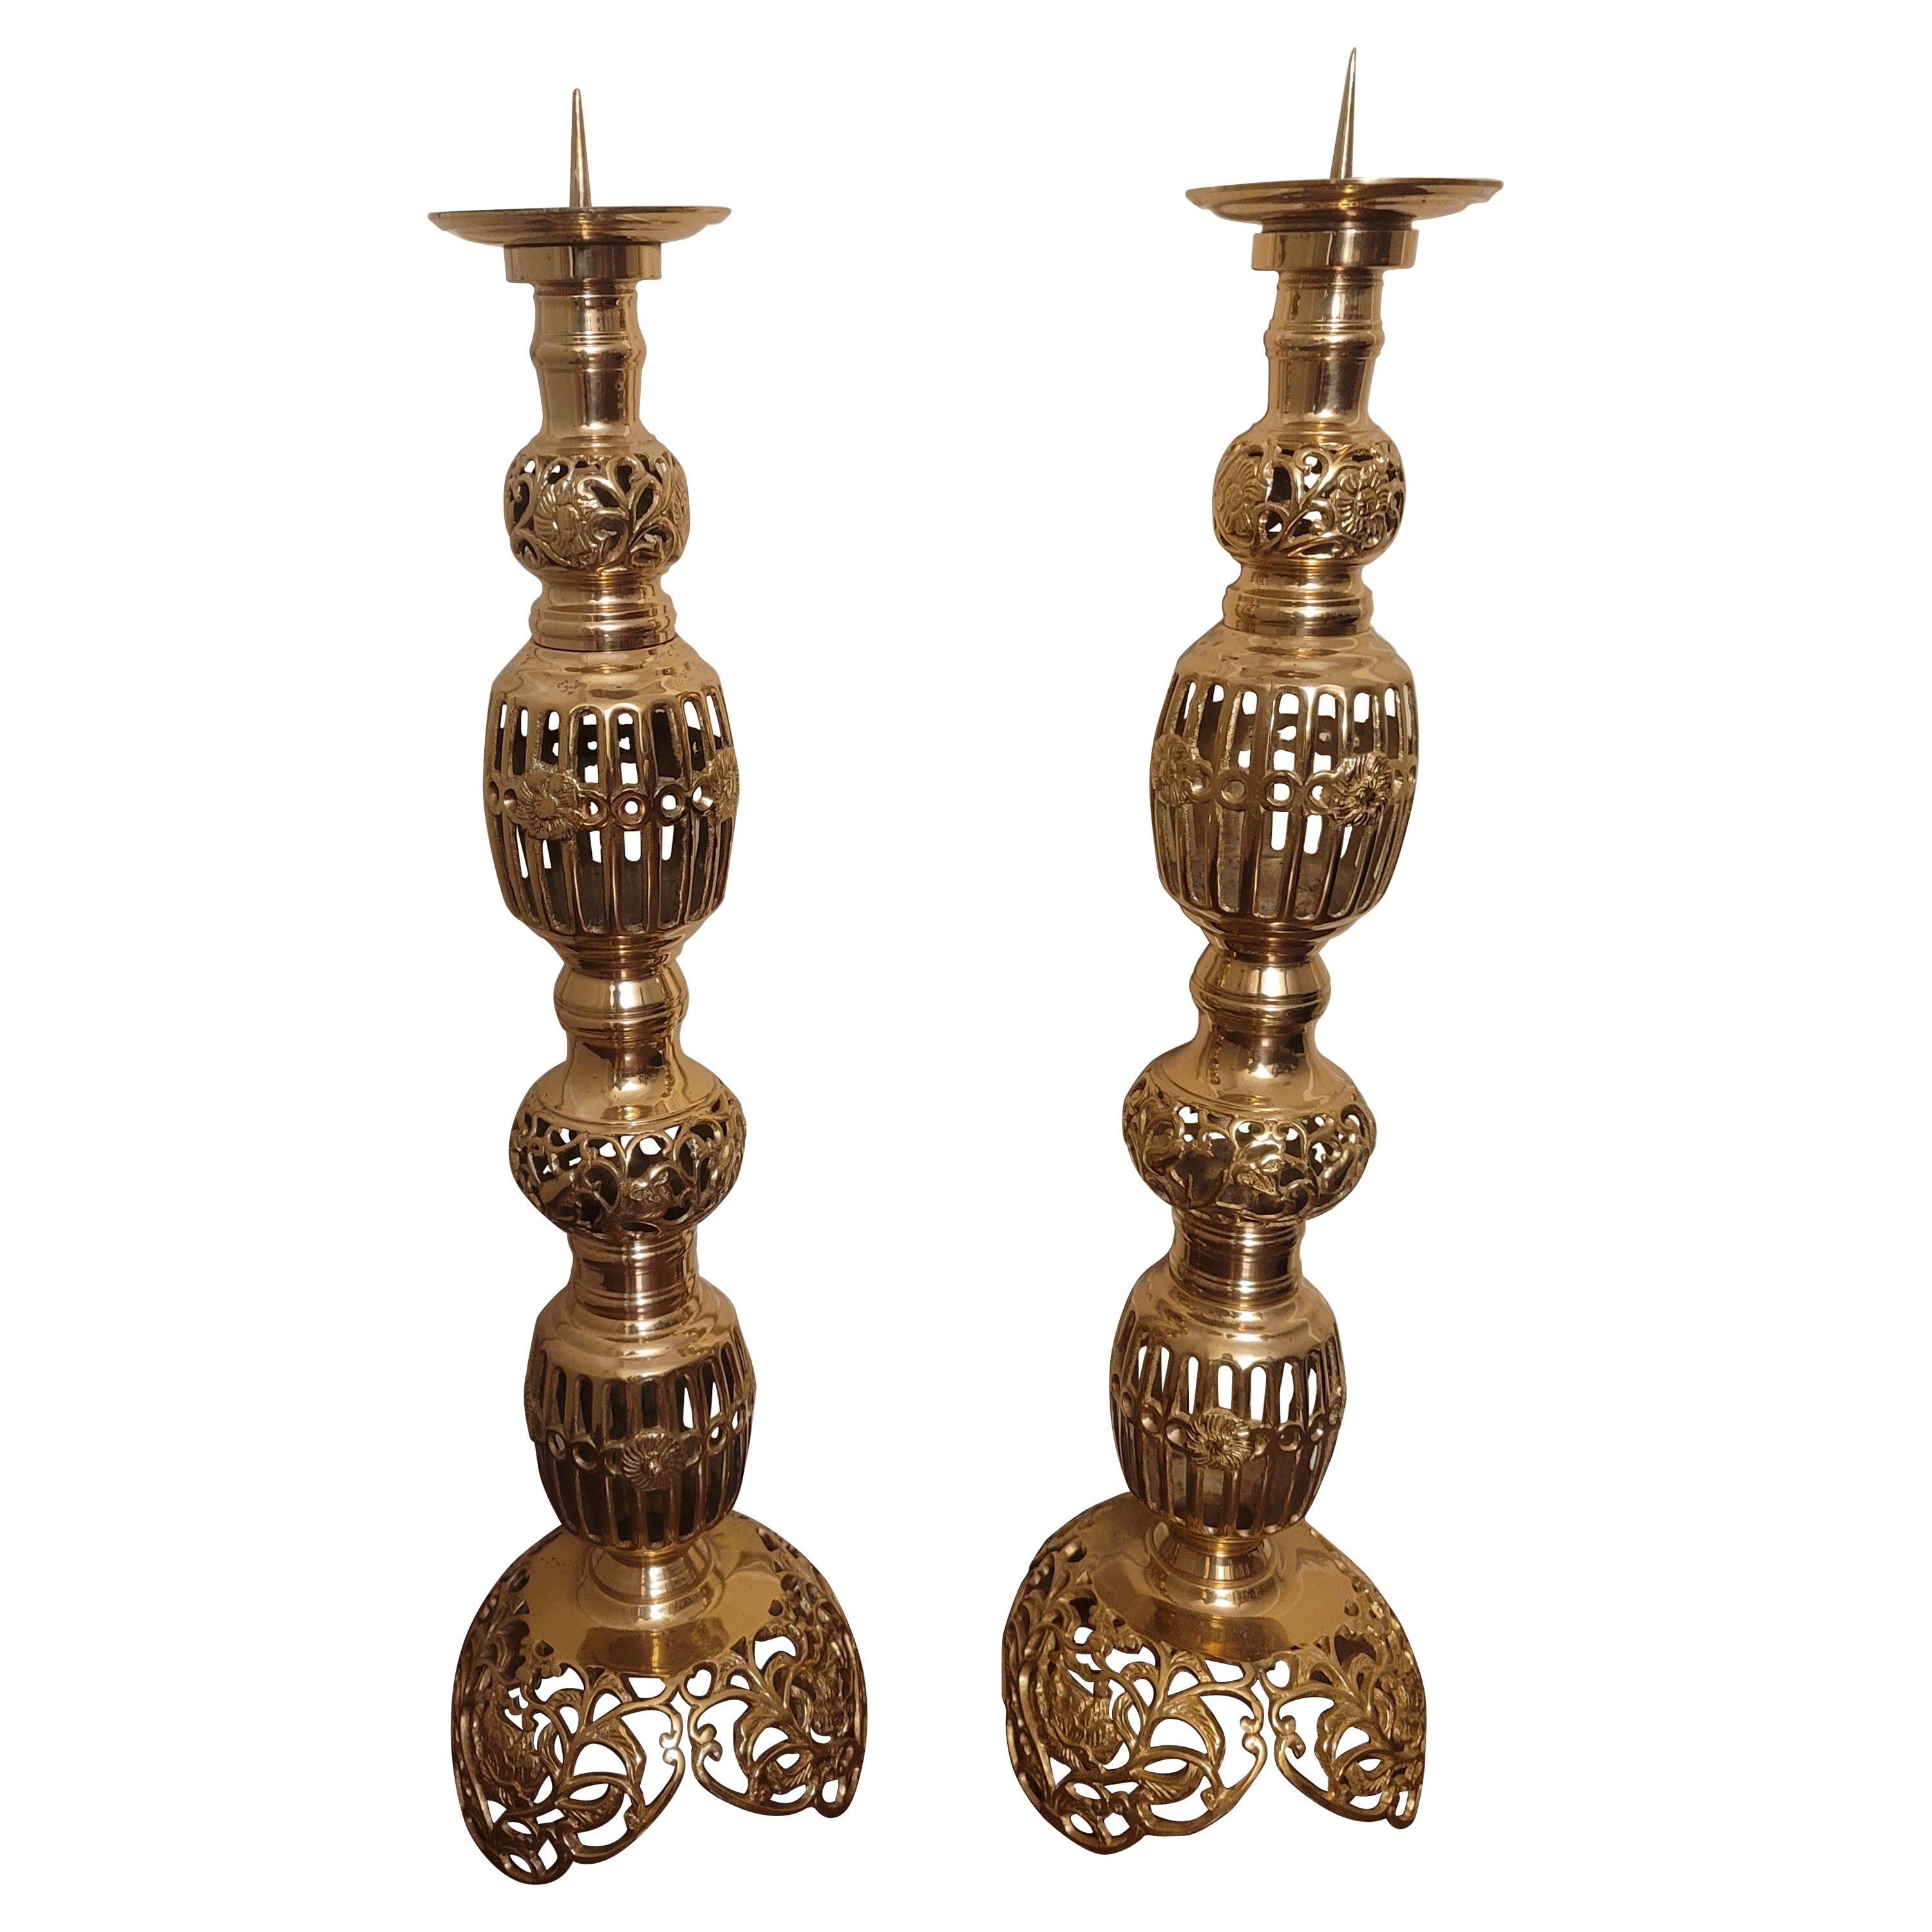 Monumental Japanese James Mont Style Large Solid Brass Candle Holders, a Pair For Sale